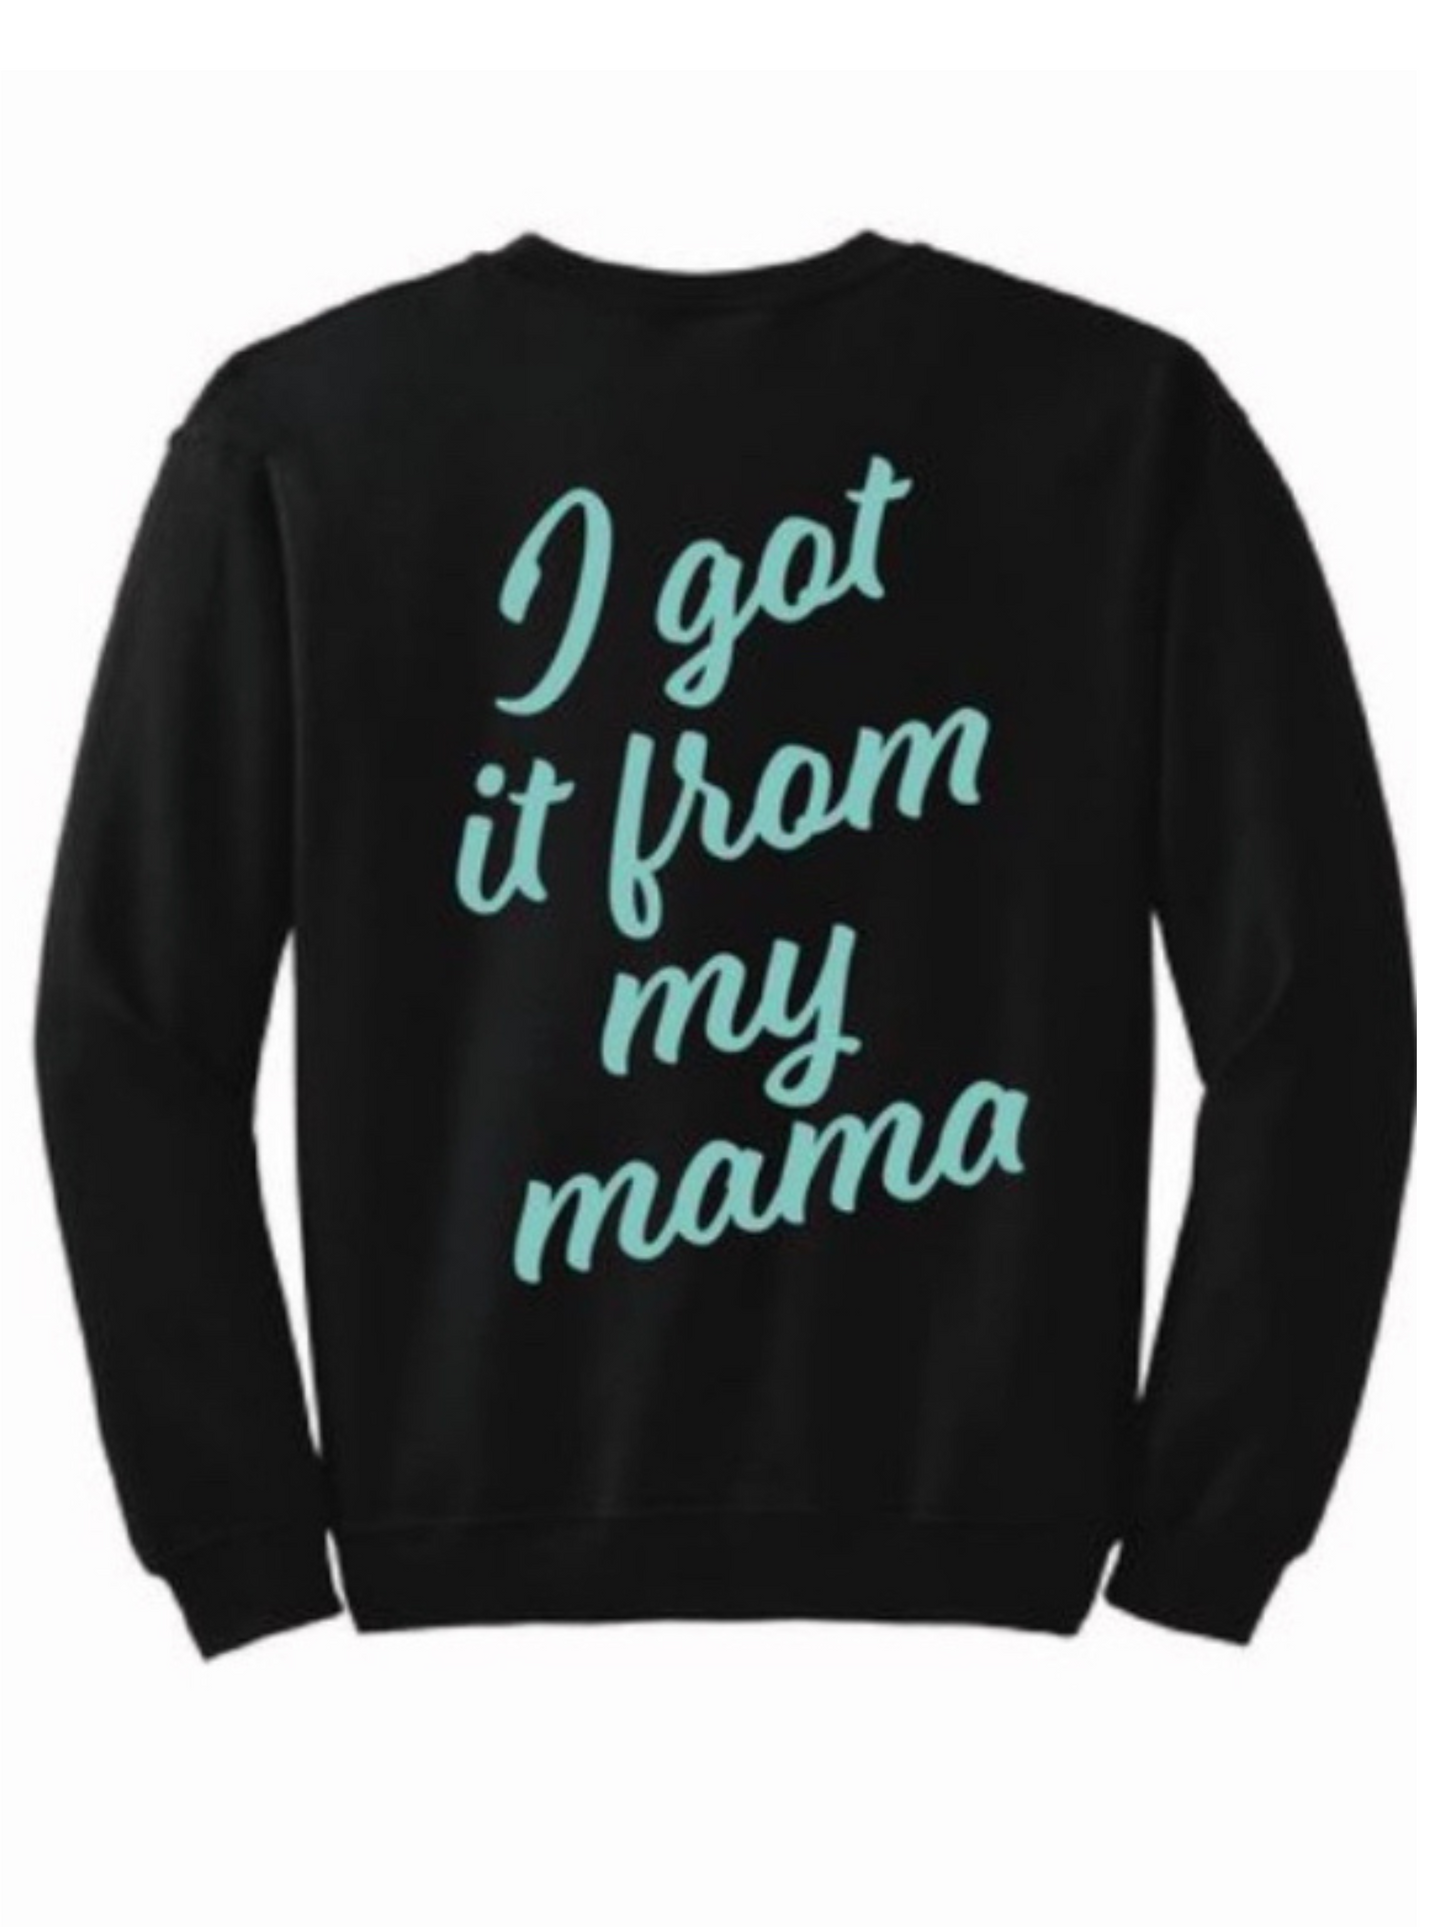 Mama Irene “Him. You. Me. WE. I got it from my mama” Special Edition Oversize Crew Neck Pullover Sweater